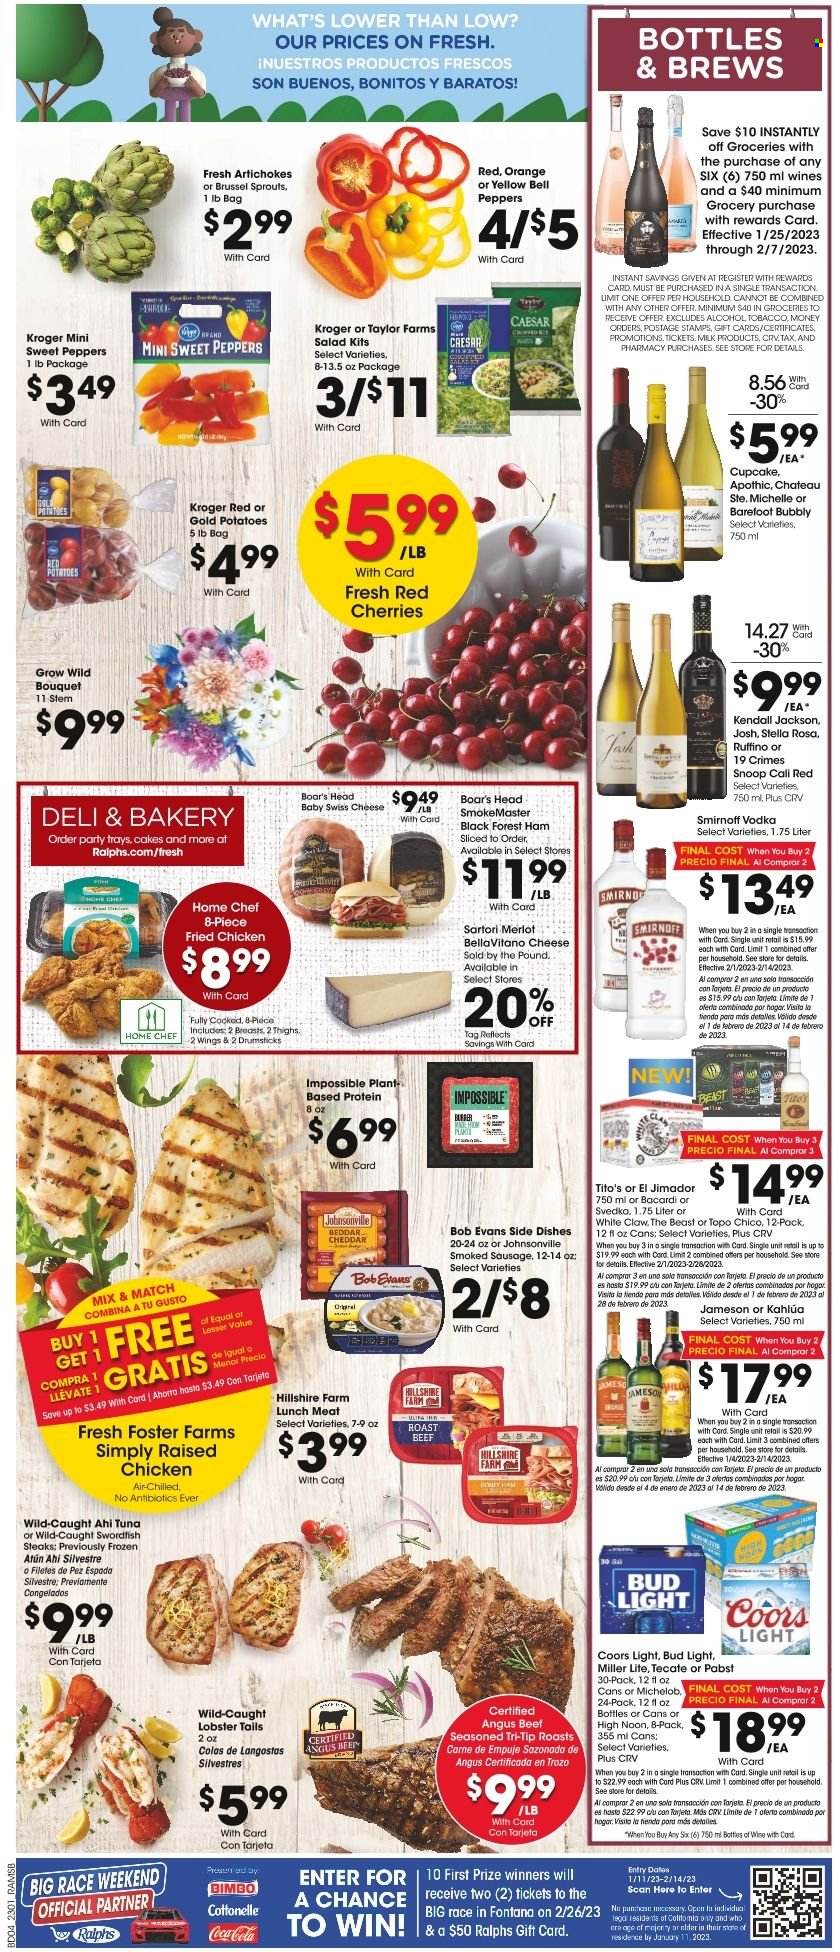 thumbnail - Ralphs Flyer - 02/01/2023 - 02/07/2023 - Sales products - cake, cupcake, artichoke, bell peppers, sweet peppers, potatoes, salad, peppers, brussel sprouts, cherries, oranges, lobster, swordfish, tuna, lobster tail, Bob Evans, ham, Hillshire Farm, Johnsonville, sausage, smoked sausage, lunch meat, swiss cheese, cheese, BellaVitano, milk, Kahlúa, red wine, wine, Merlot, Bacardi, Smirnoff, vodka, Jameson, White Claw, beer, Bud Light, beef meat, steak, roast beef, Cottonelle, bouquet, Miller Lite, Coors, Michelob. Page 4.